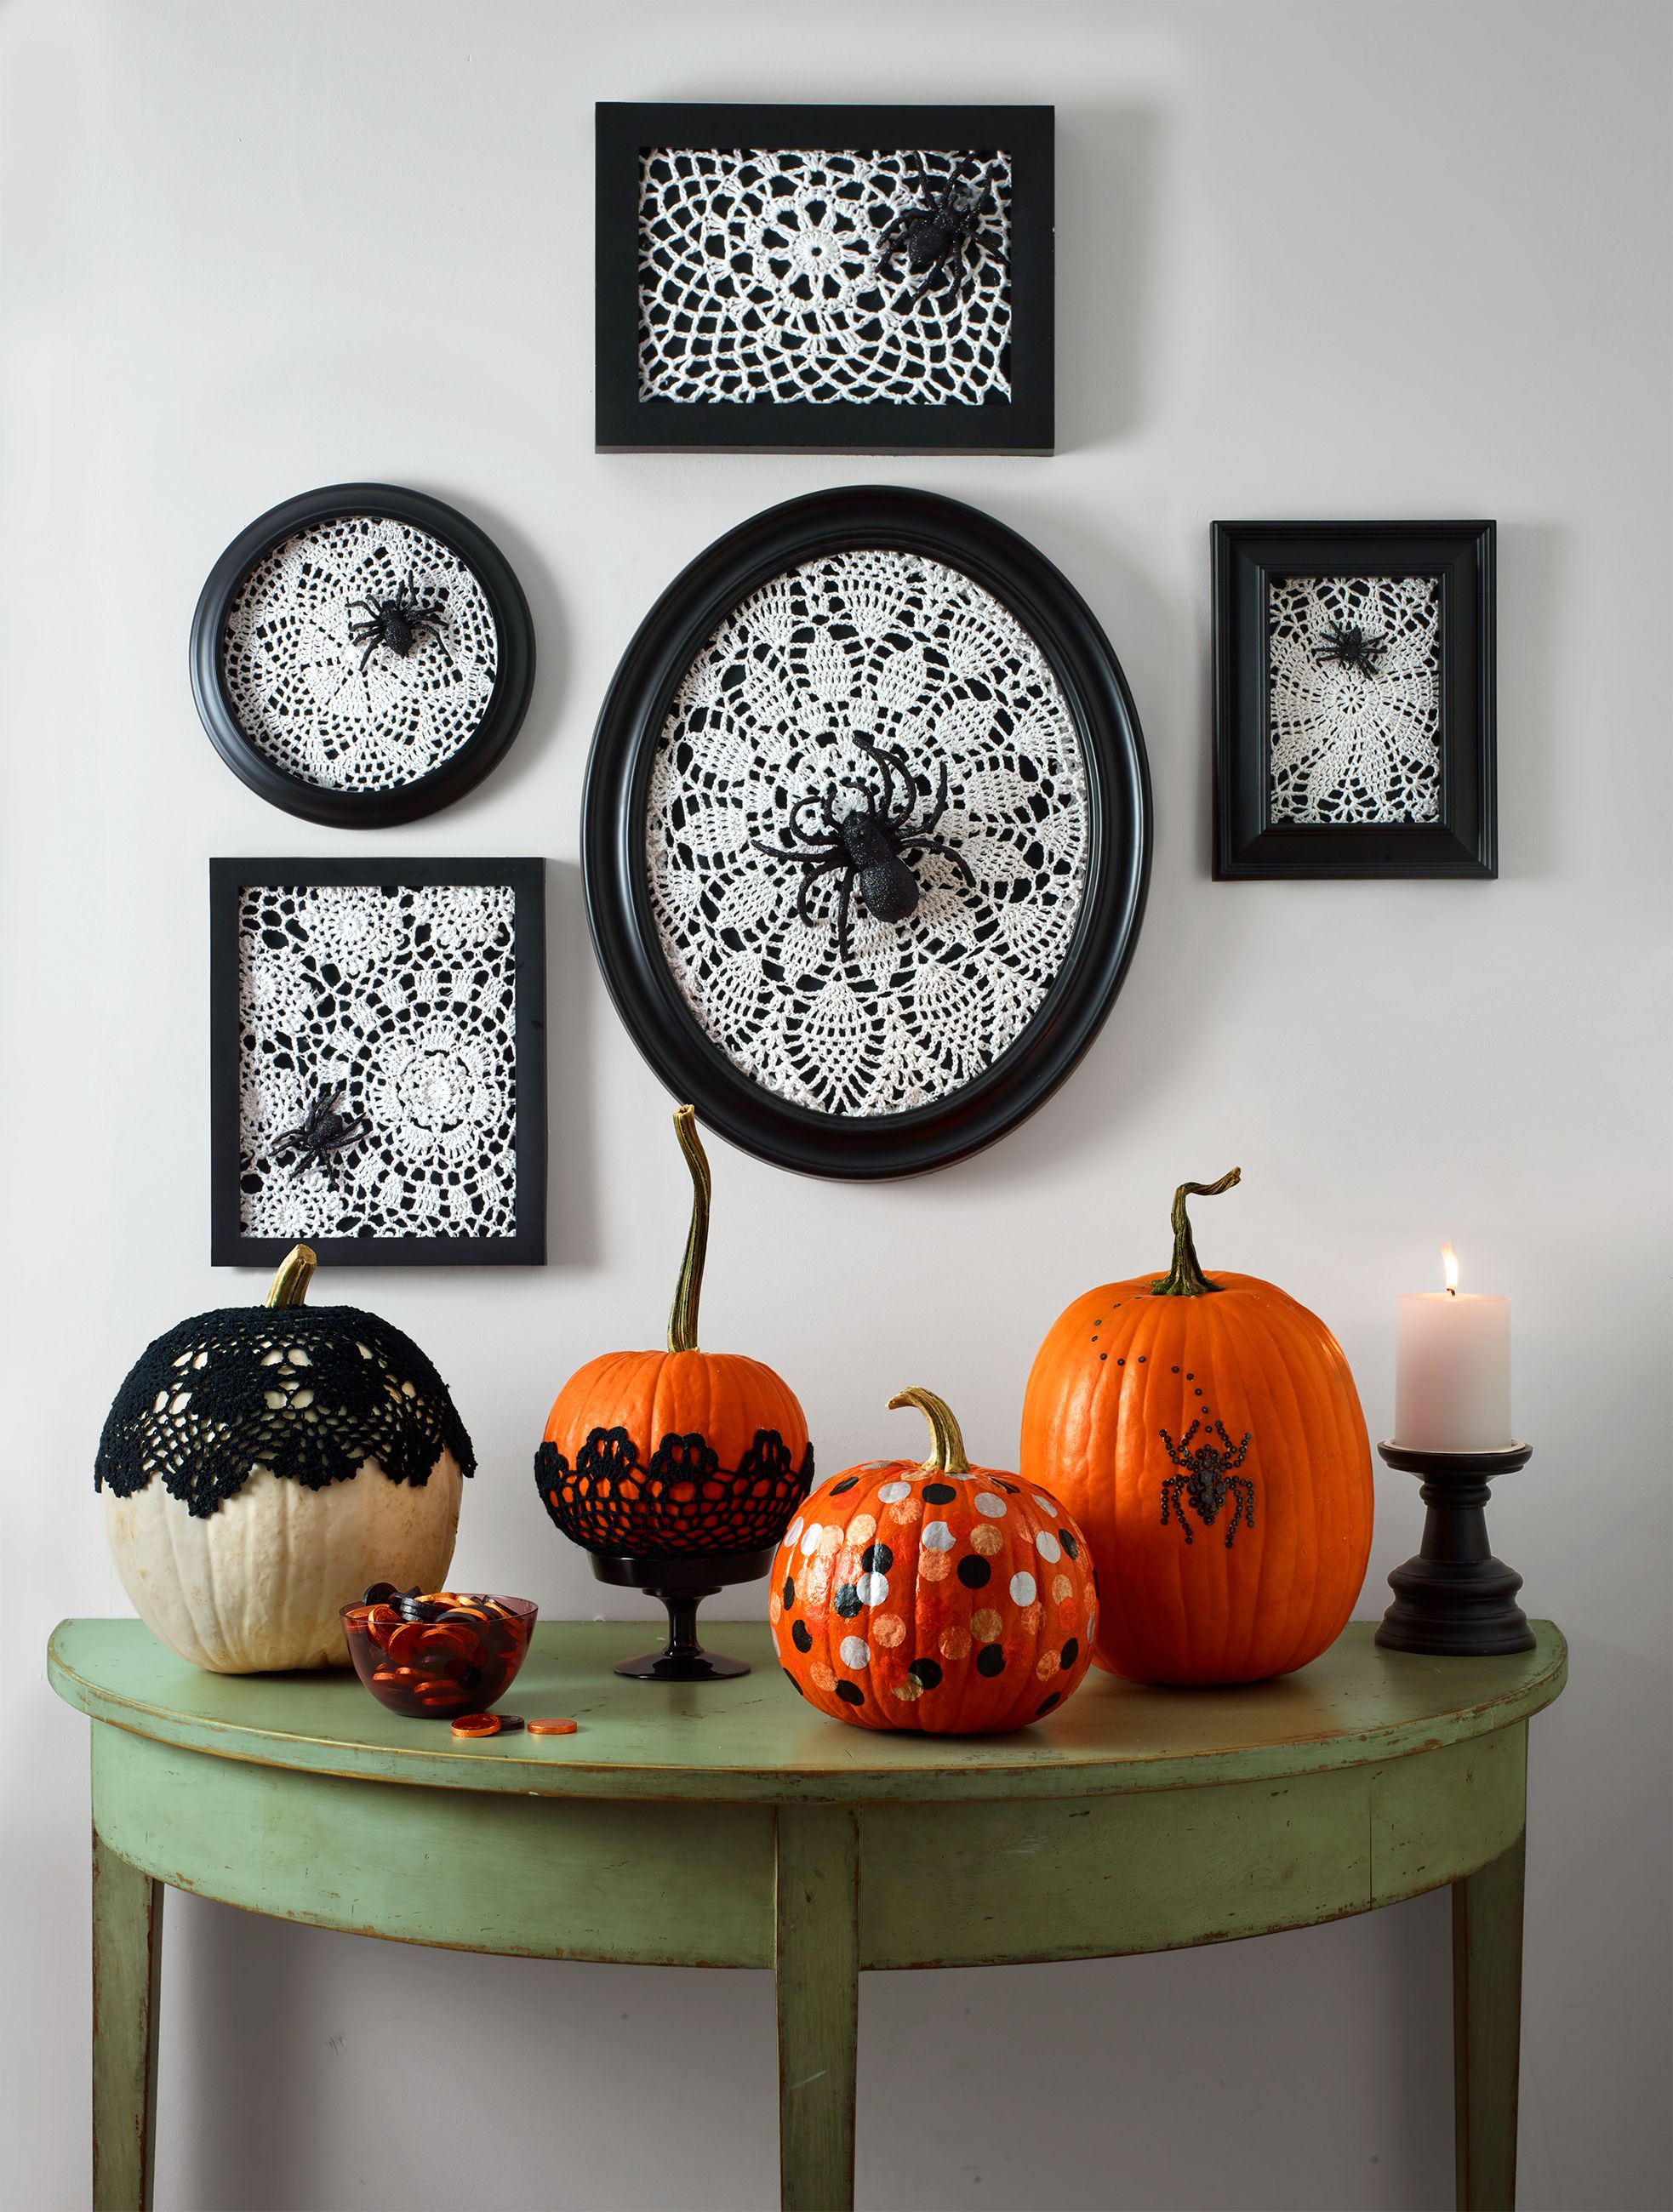 View Acrylic Halloween Painting Ideas Pictures